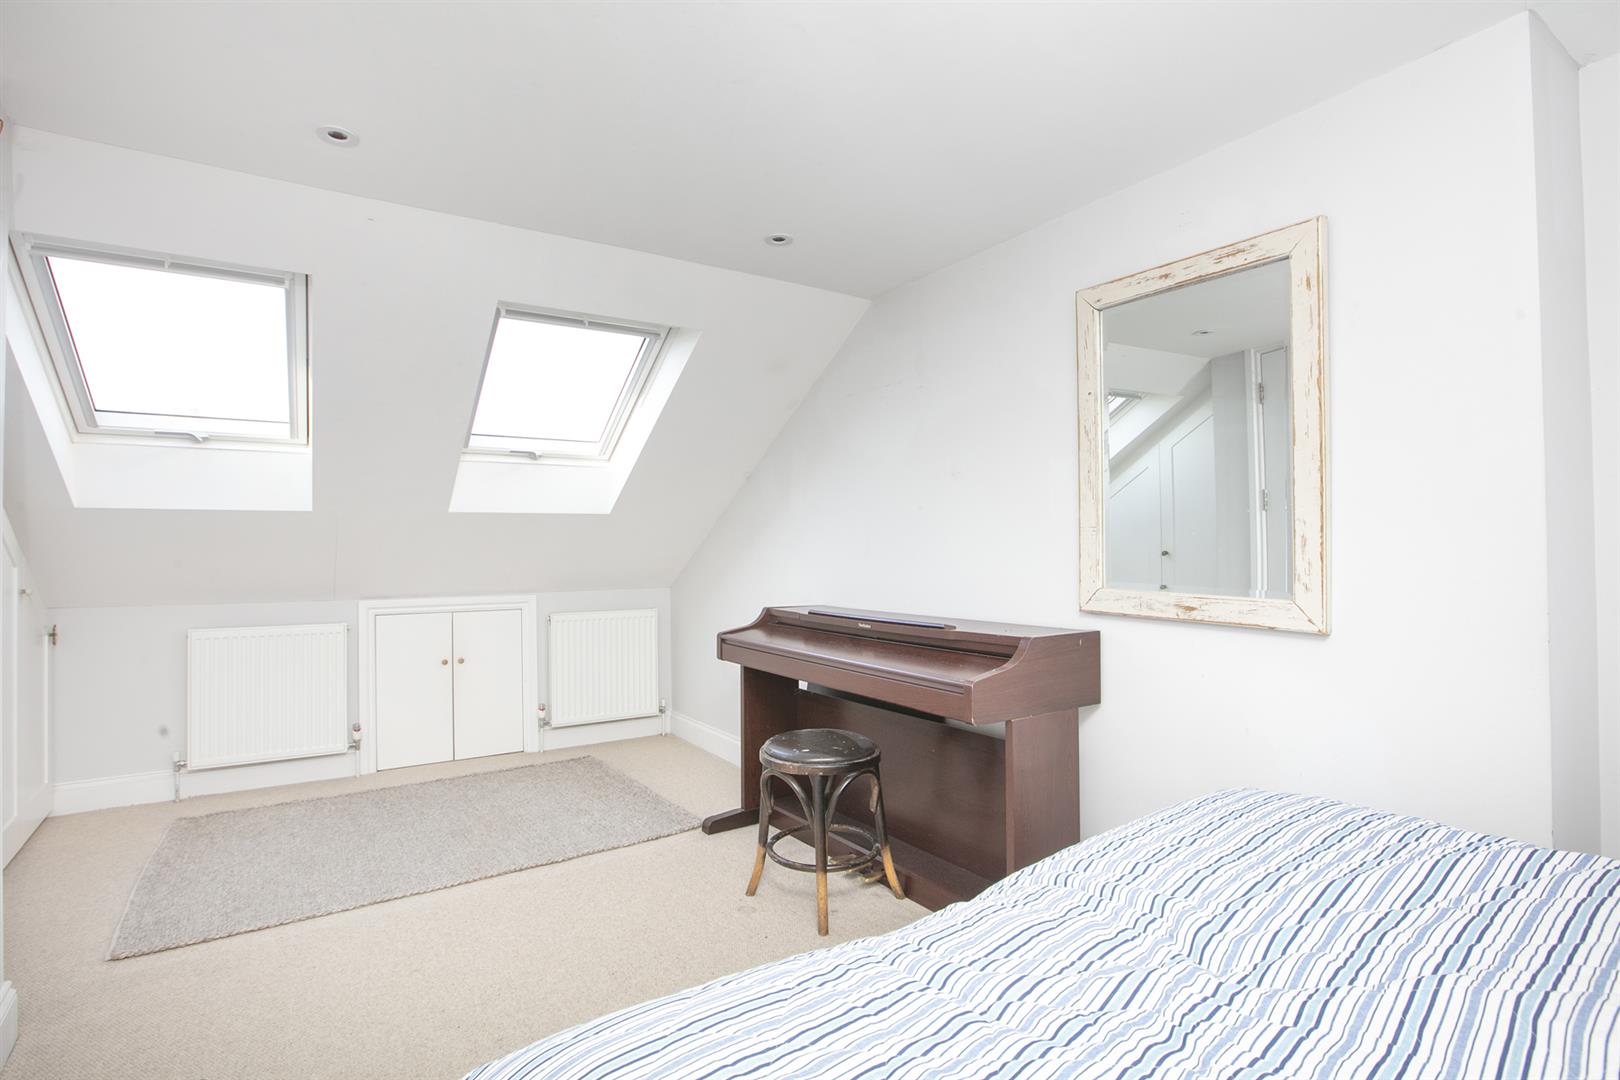 Flat - Conversion For Sale in Shenley Road, London, SE5 782 view7